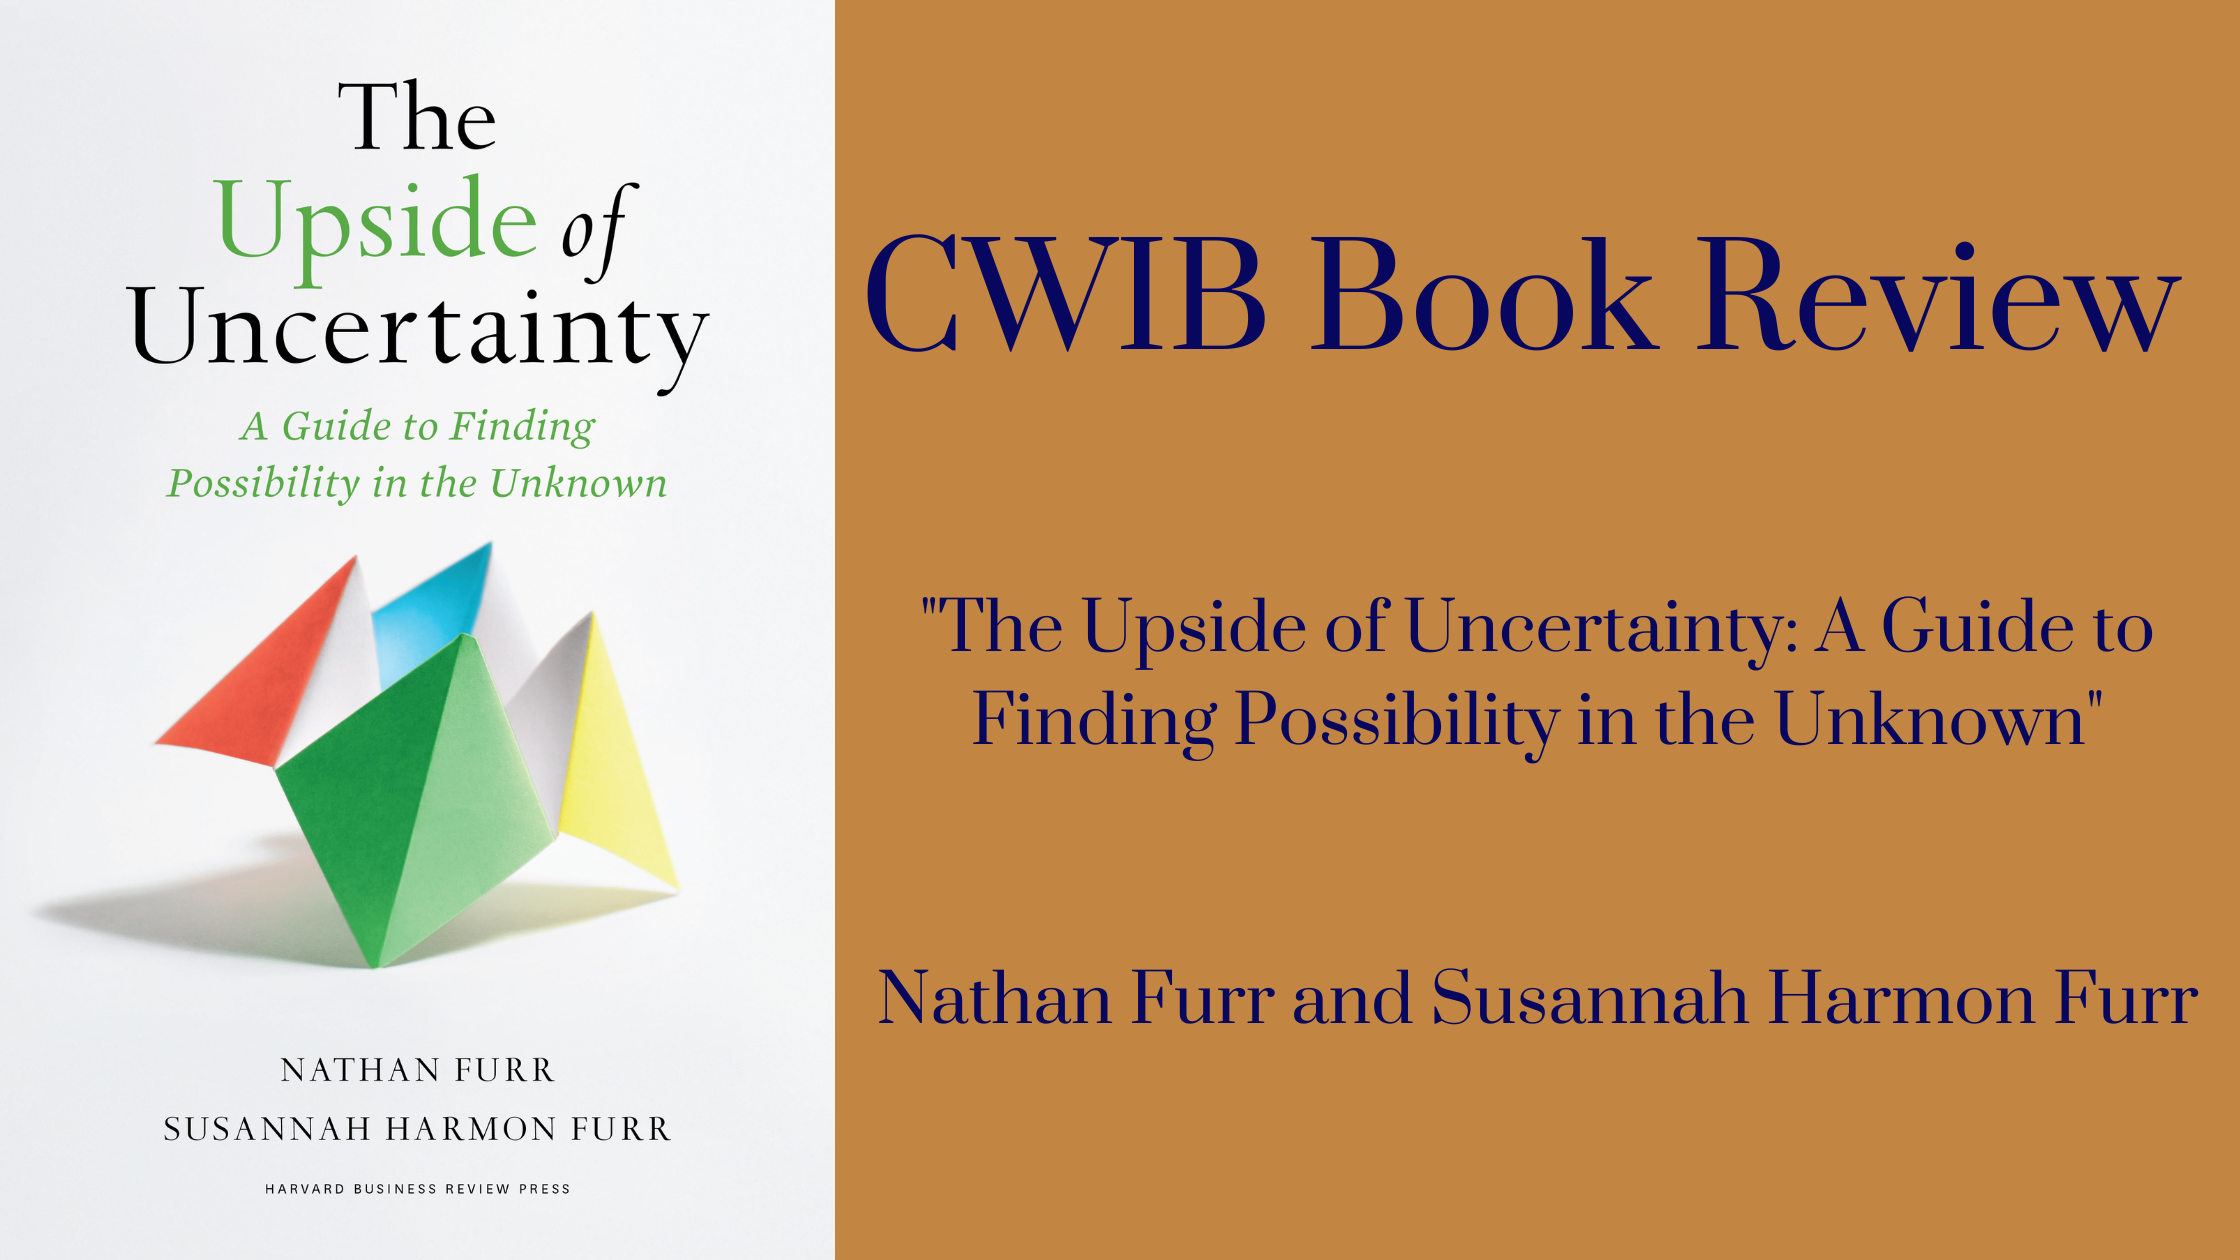 CWIB Book Review: “The Upside of Uncertainty” — Catholic Women in Business